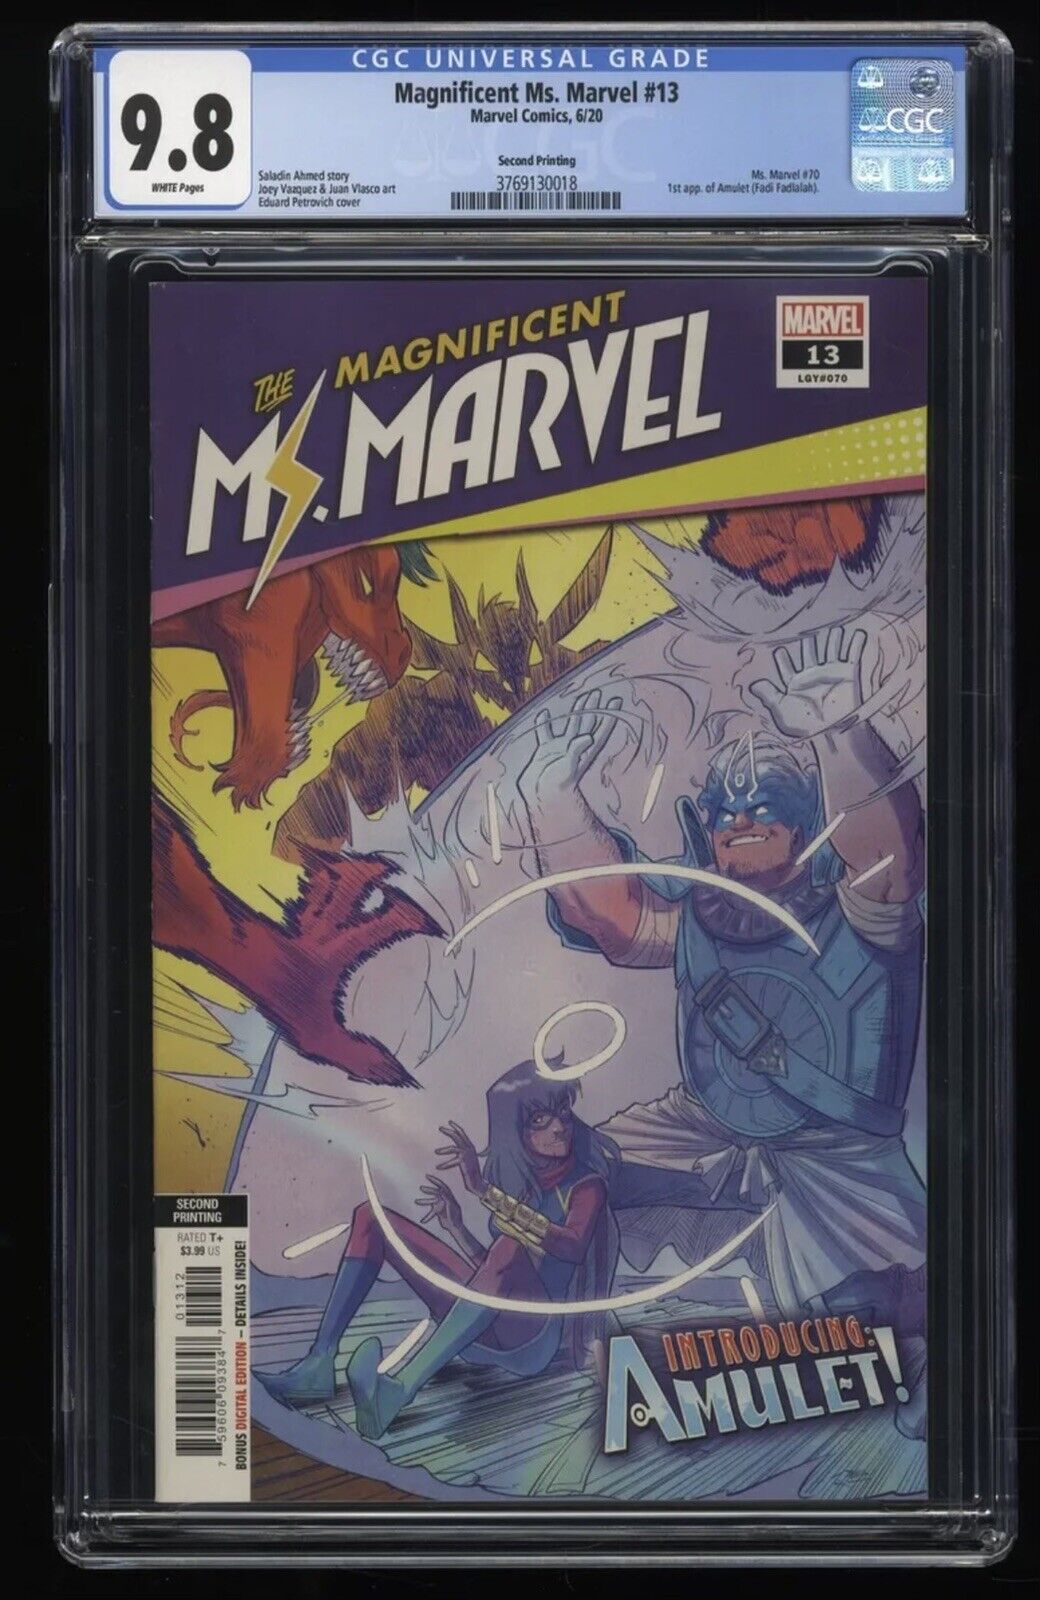 The Magnificent Ms. Marvel #13 - CGC 9.8 - Key Issue Marvel Comics 2nd Print